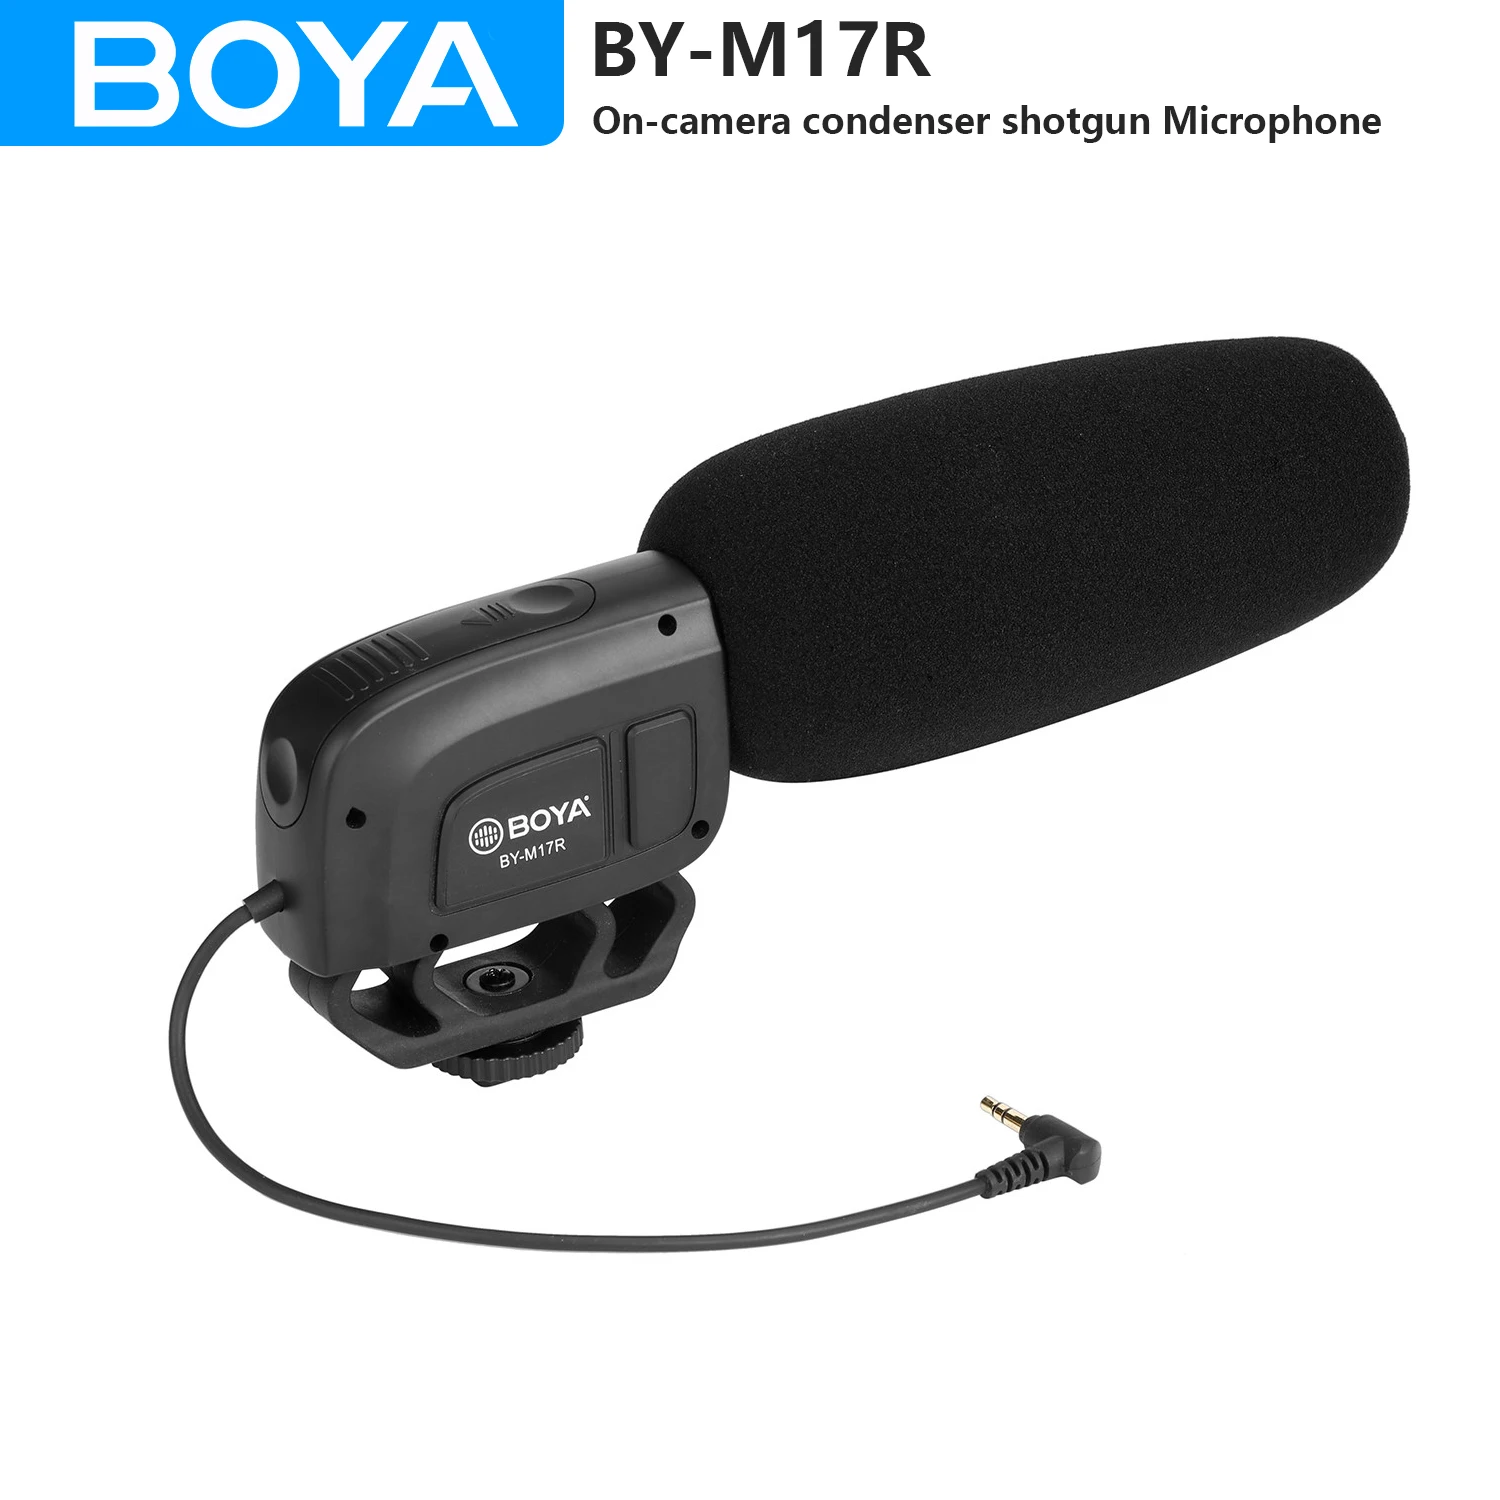 

BOYA BY-M17R On-camera Condenser Shotgun Microphone for DSLR Camcorder Streaming Audio Recorders Video Shooting Vlogging Podcast